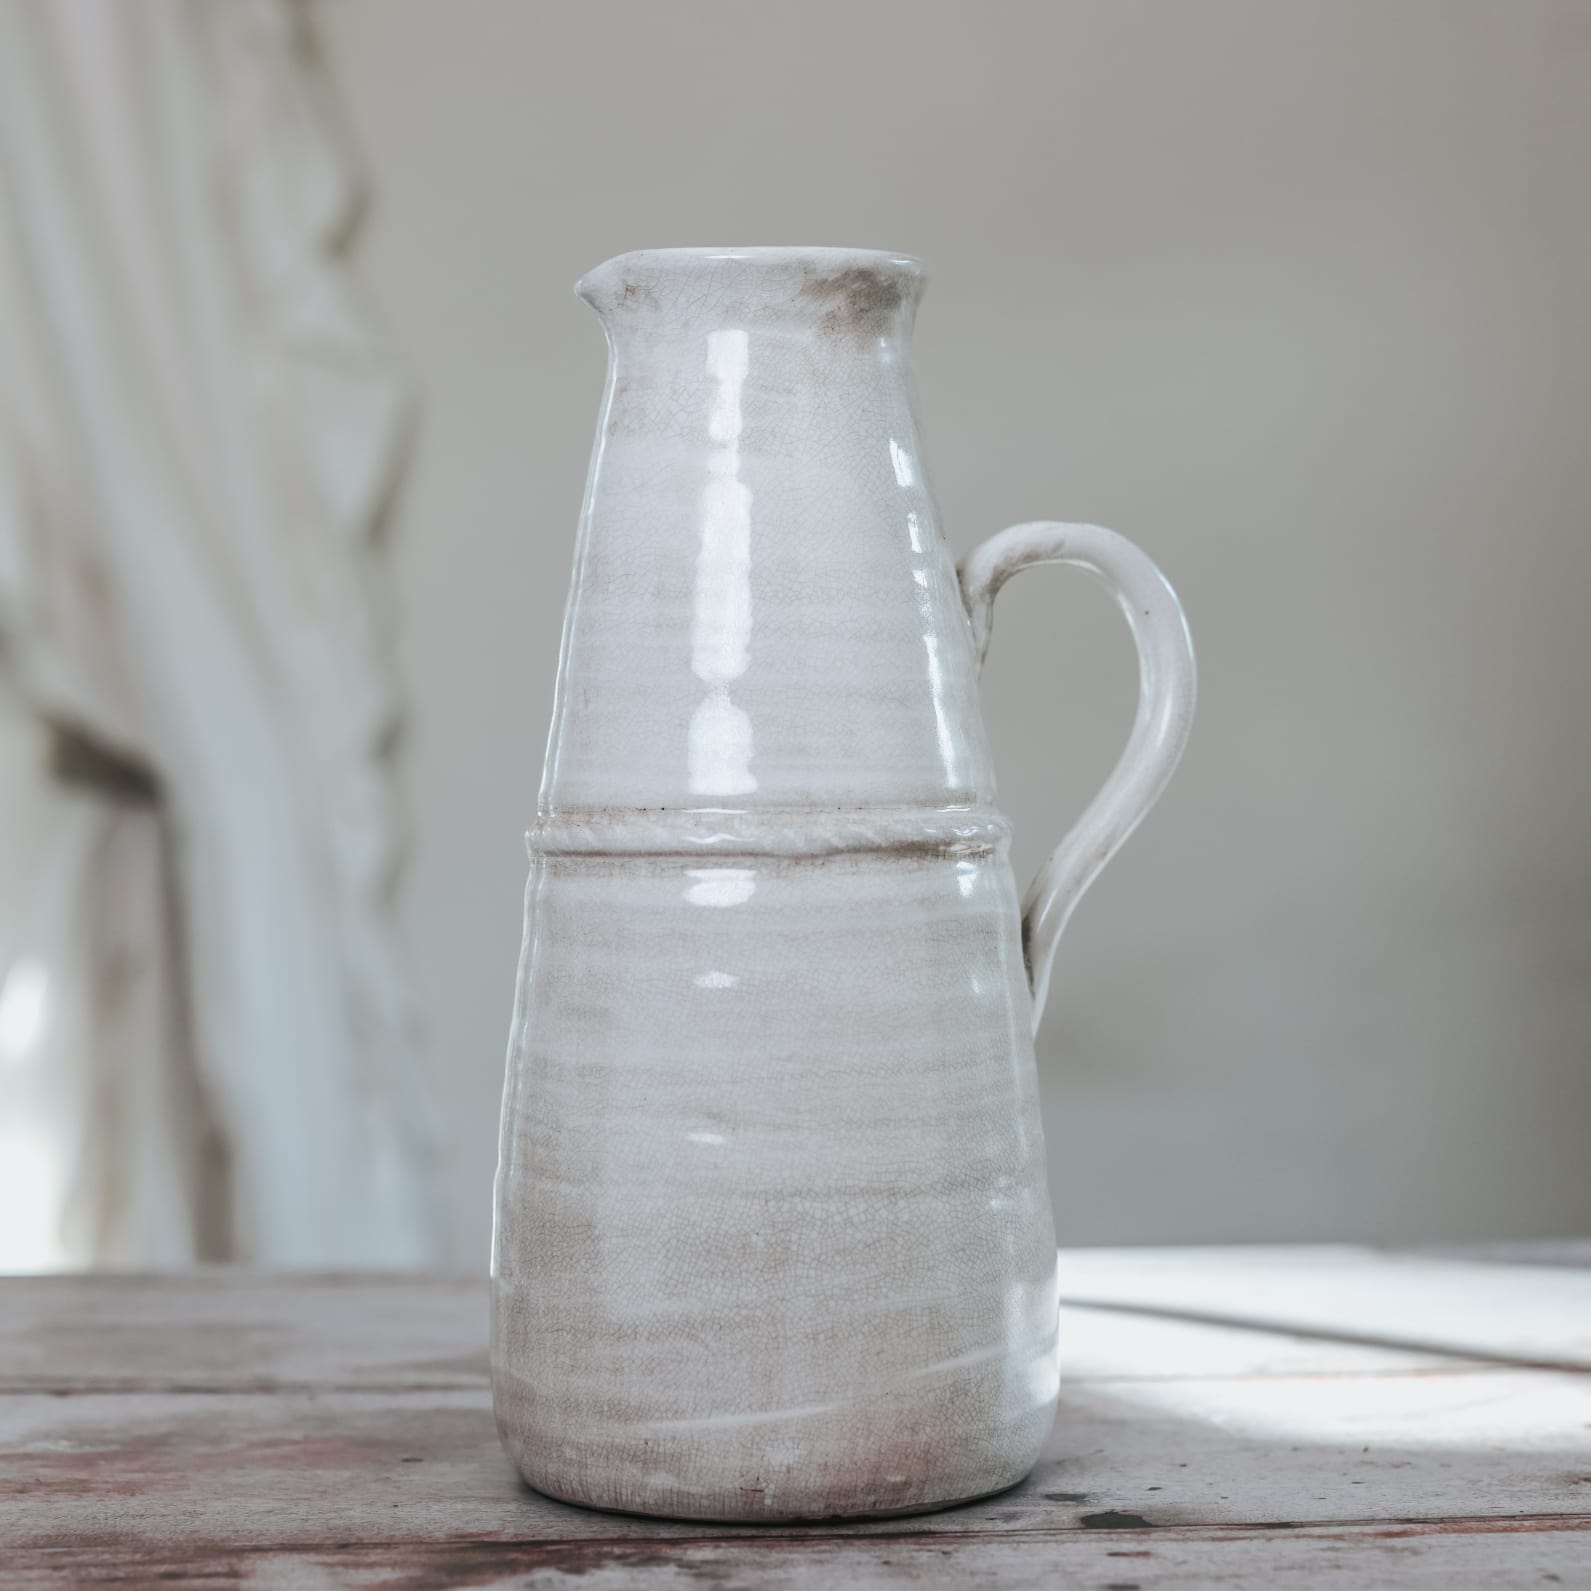 Creamy ceramic glazed vintage jug with handle on wooden table.